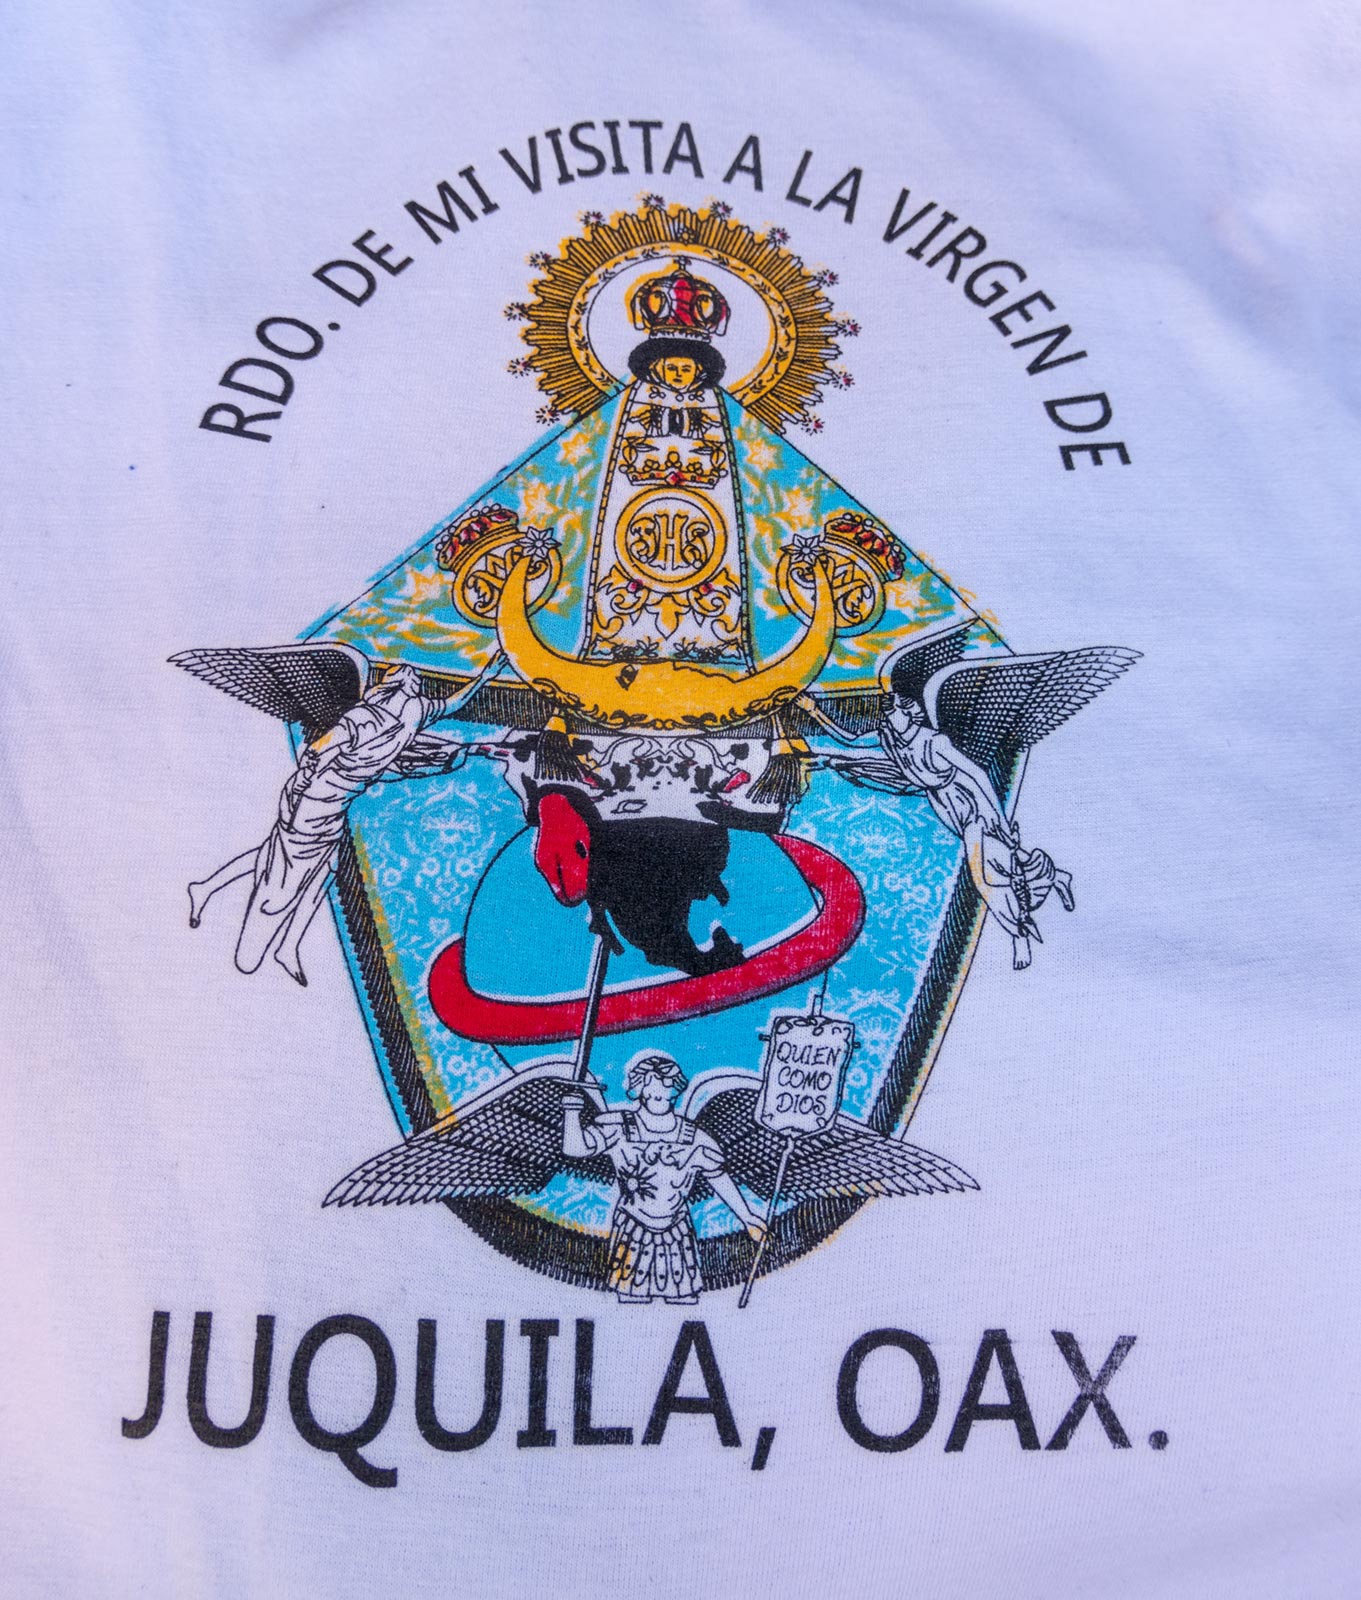 Image of miraculous statue of Virgin Mary on t-shirt, for sale in market near Church of Virgin Mary, Juquila